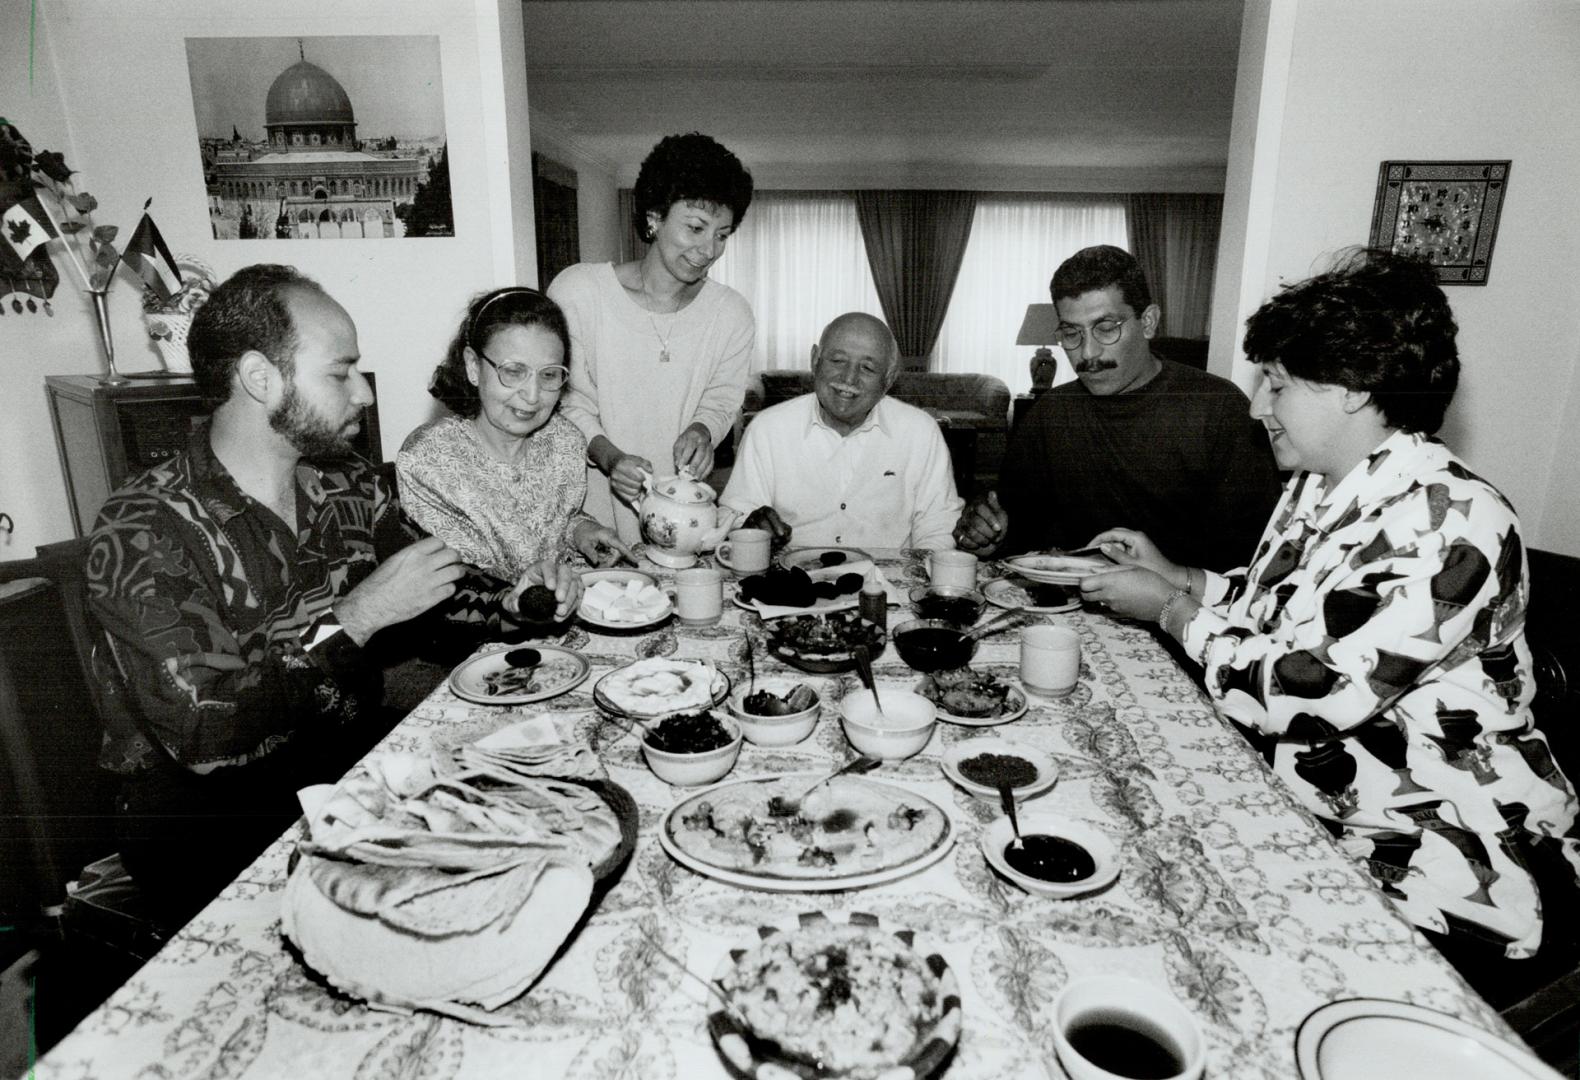 Celebrating Accord: Patriarch Abdellatif Adbul Qader presides over a family meal, flanked on left by son Bashar, wife Suhaila, daughter Reem, and on right by daughter Rana and husband Mohammad Rifaie